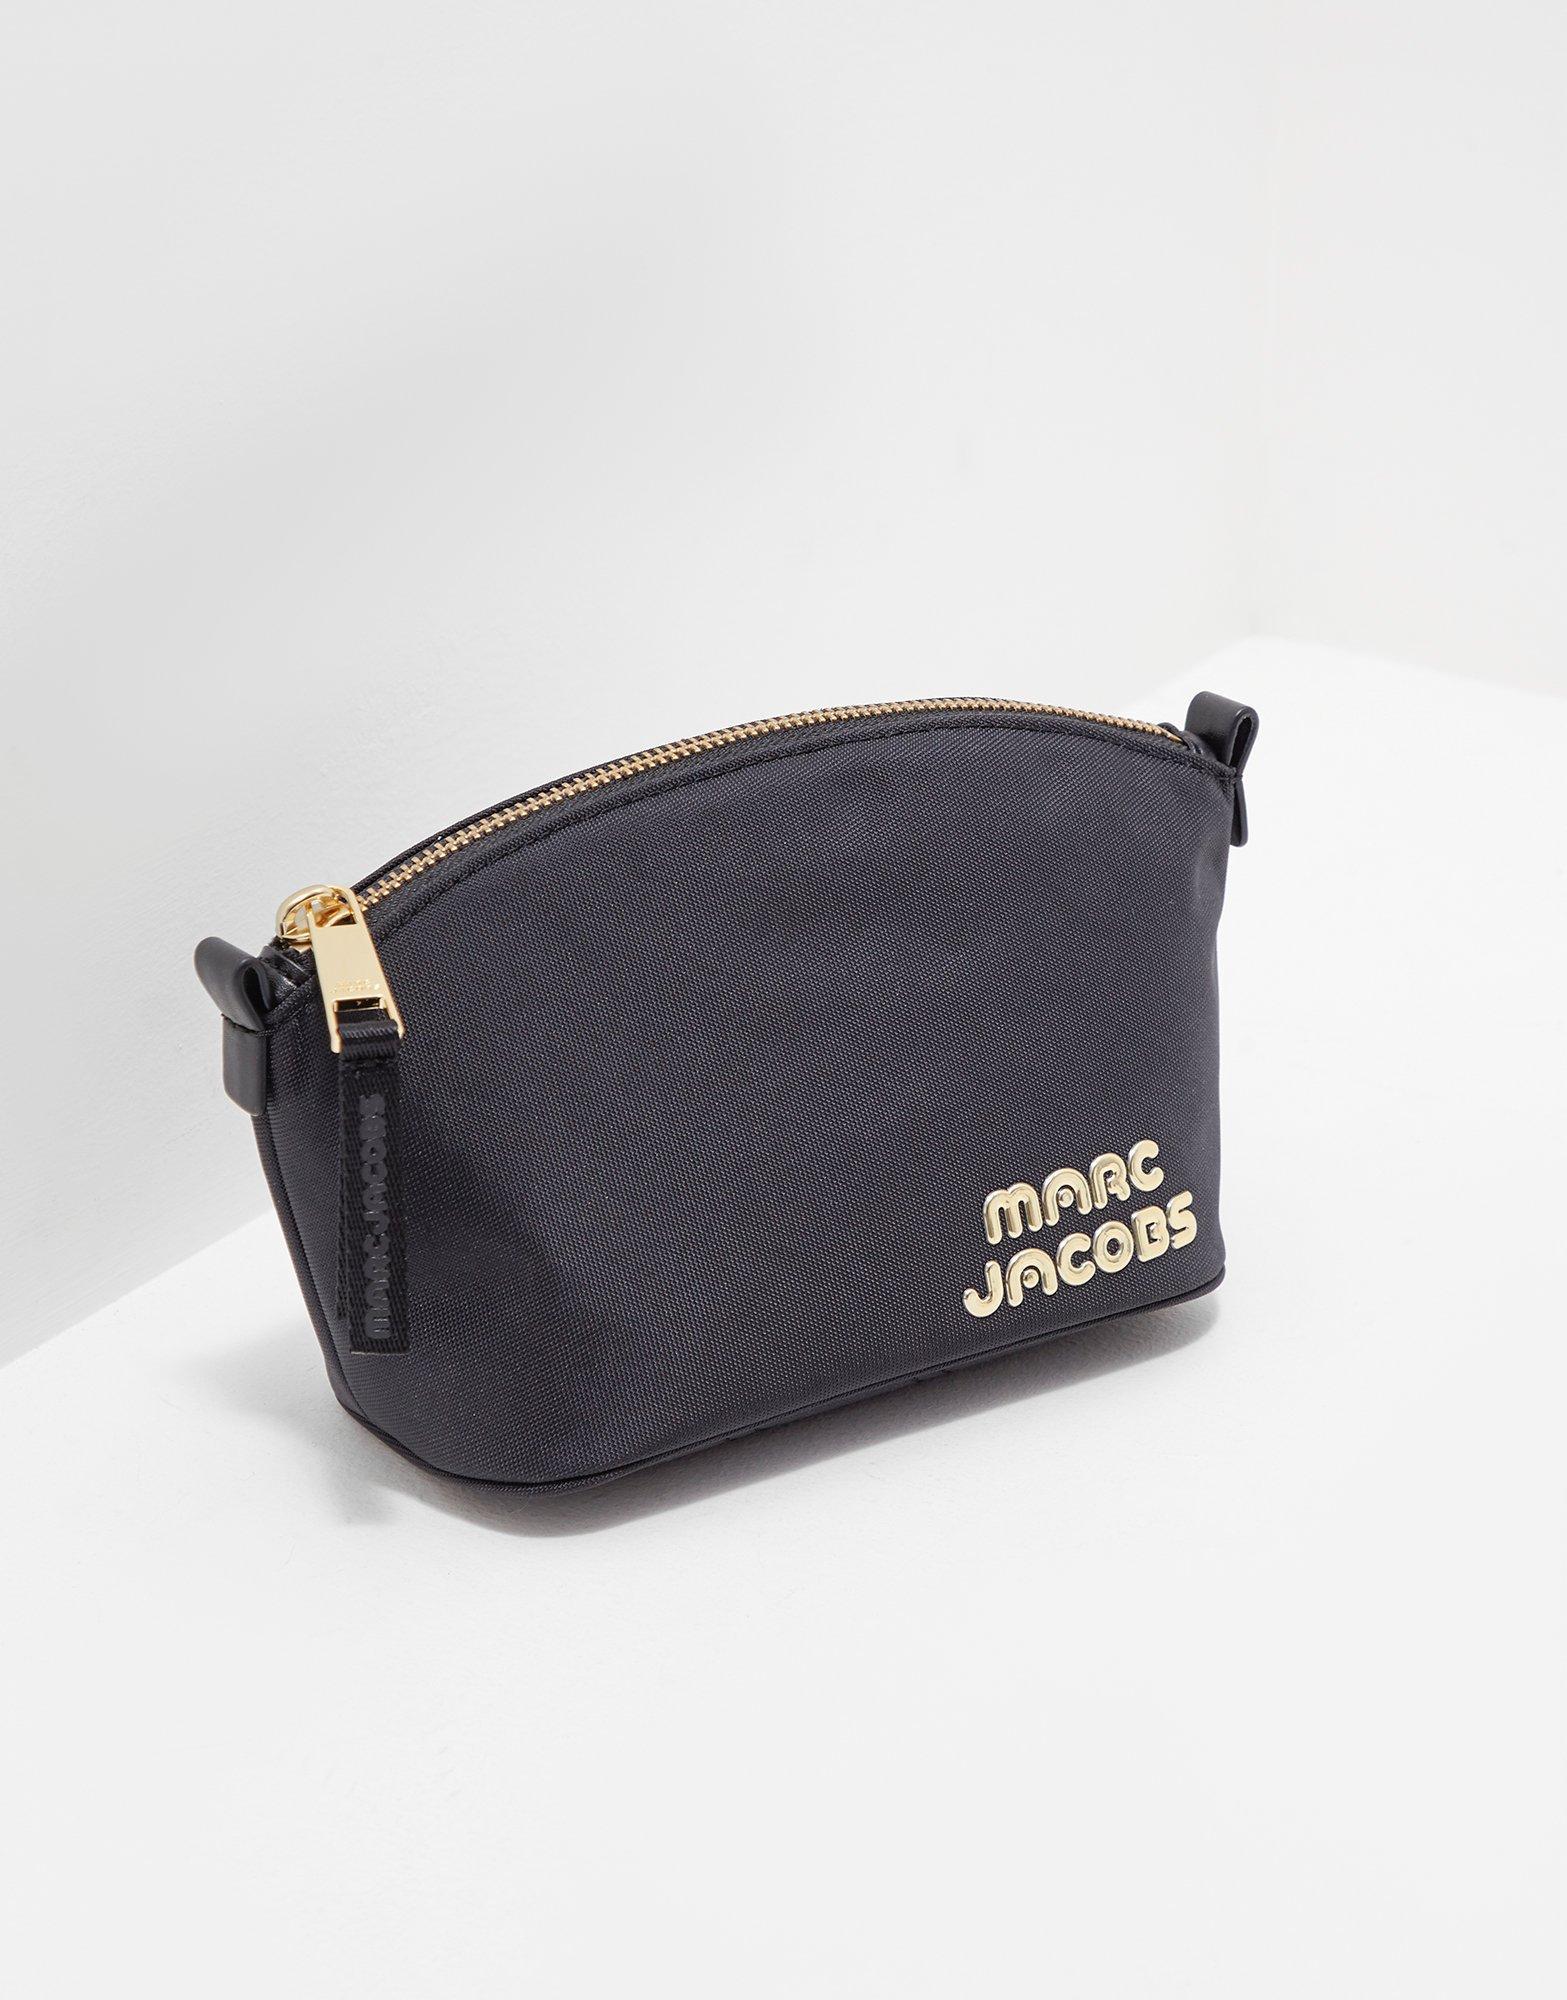 Lyst - Marc Jacobs Womens Compact Bag - Online Exclusive Black in Black